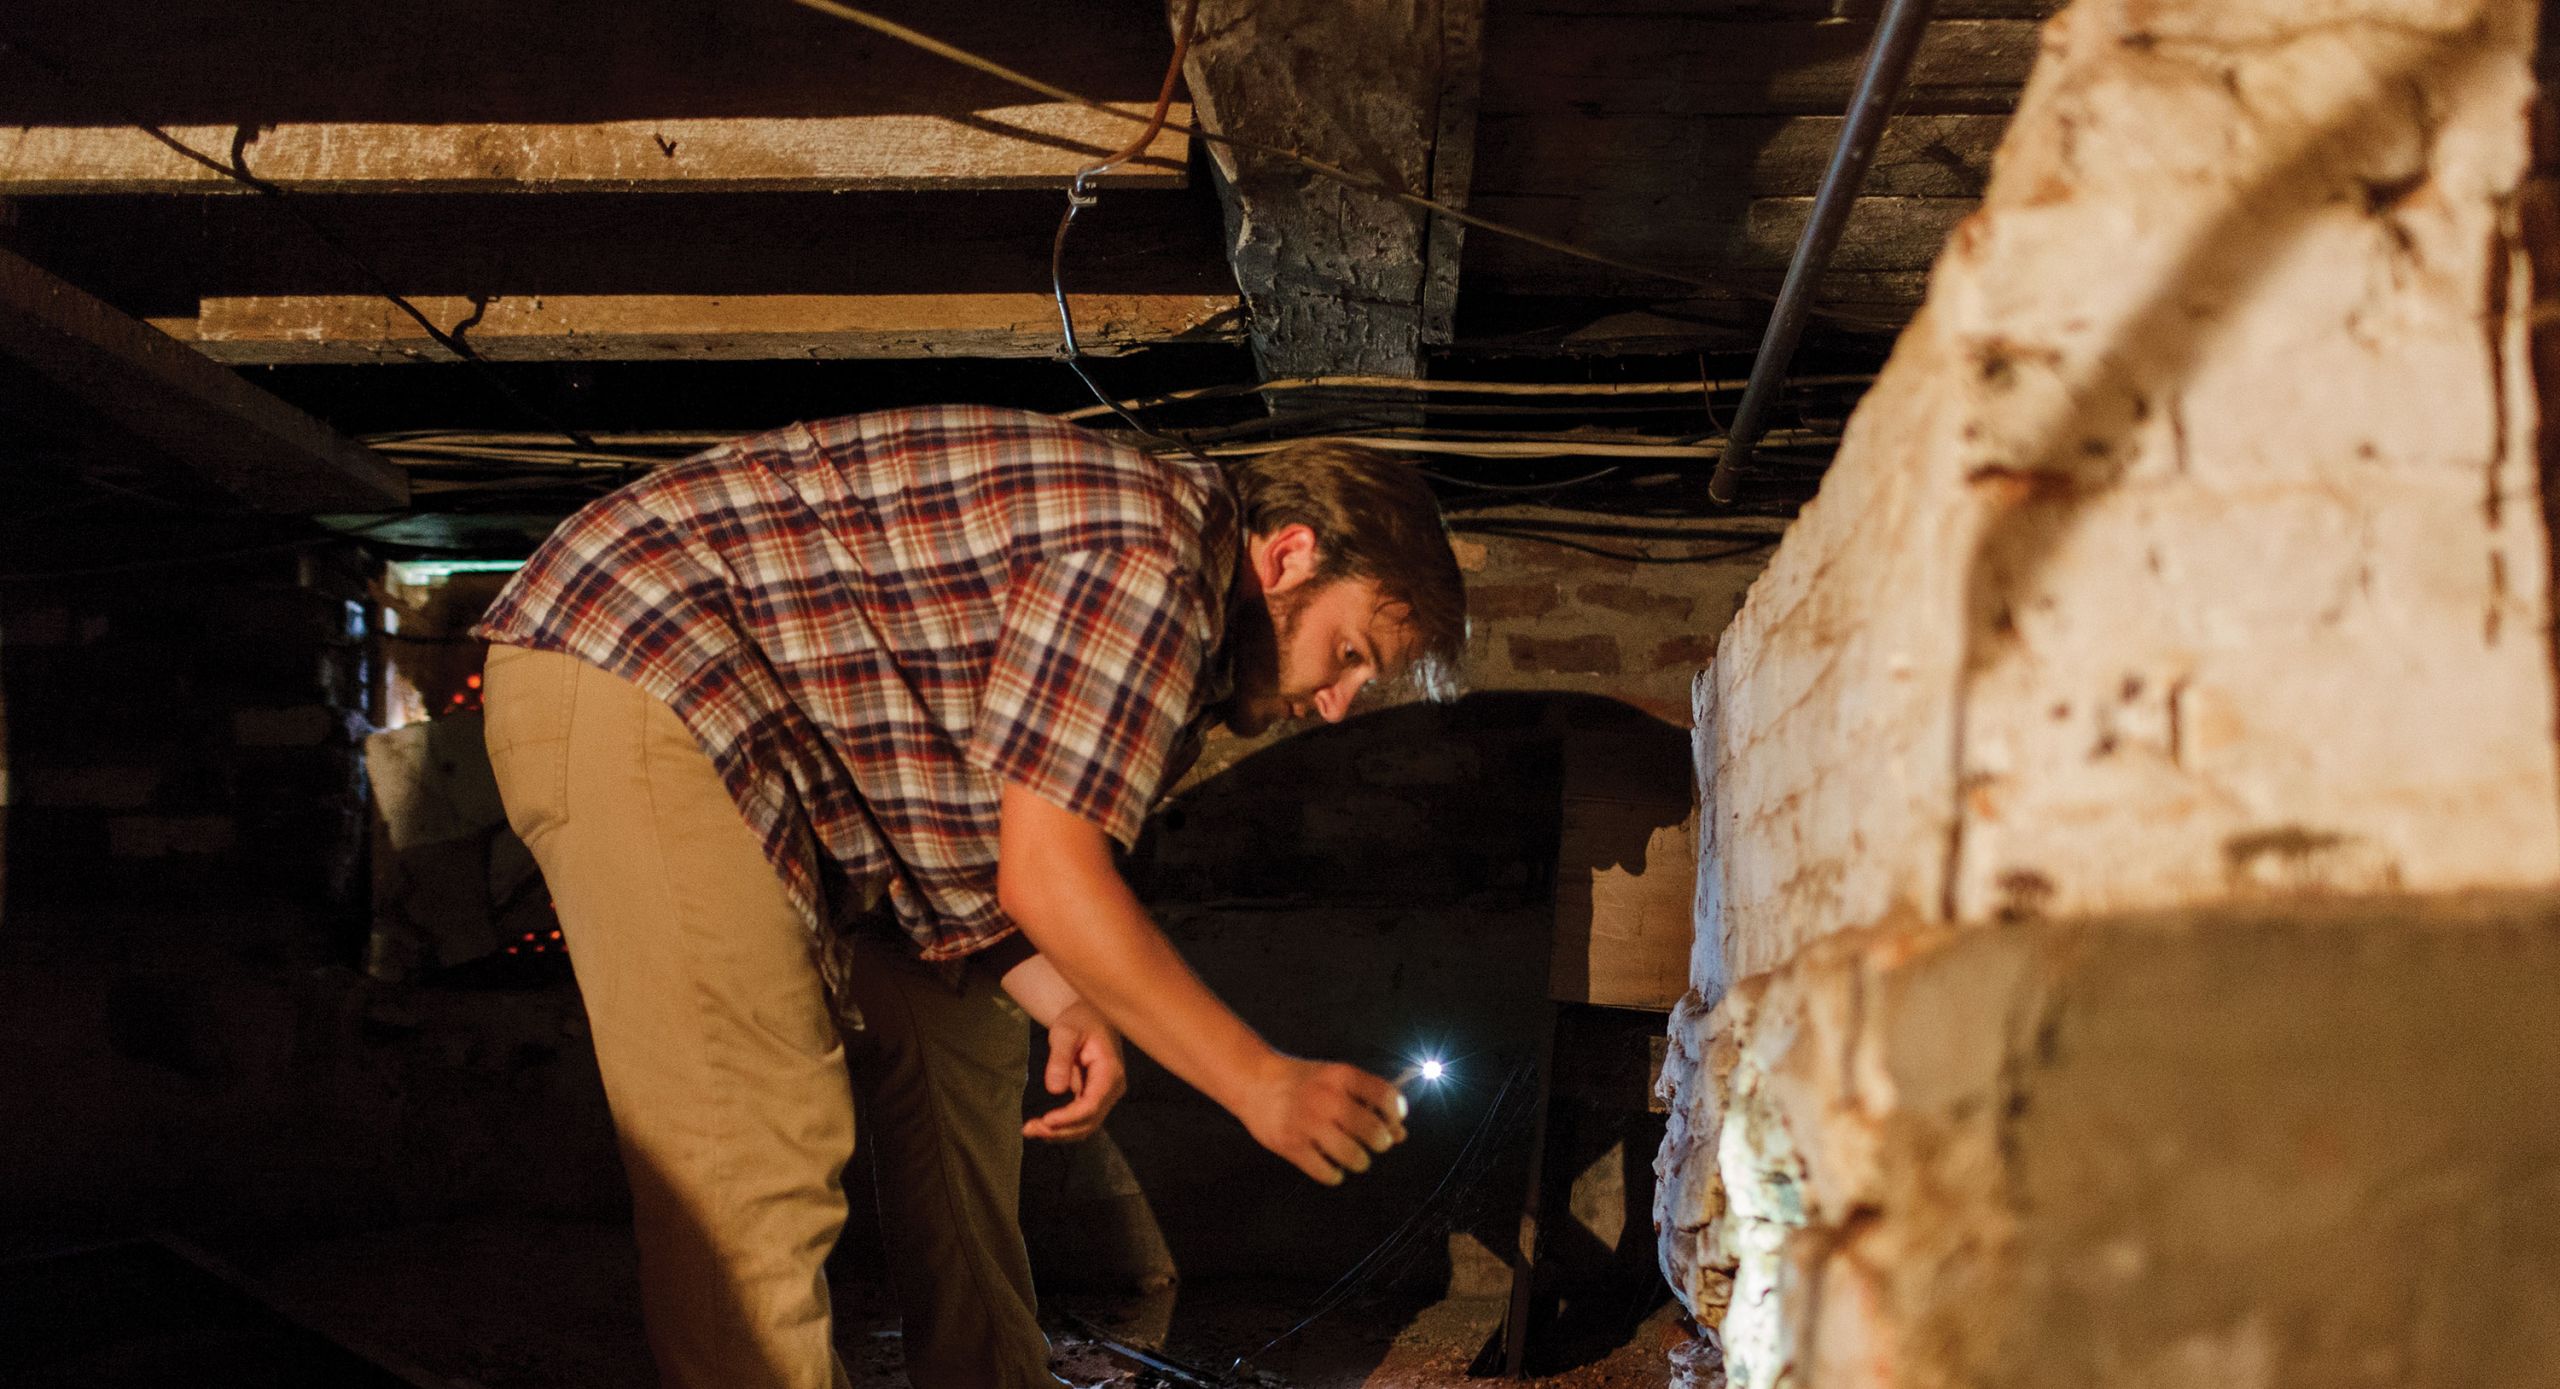 Ben Barker, a student in Liberty’s first public history course, explores the foundation of Mead’s Tavern, an 18th century building in Bedford County, Va., that the university recently purchased and plans to restore.